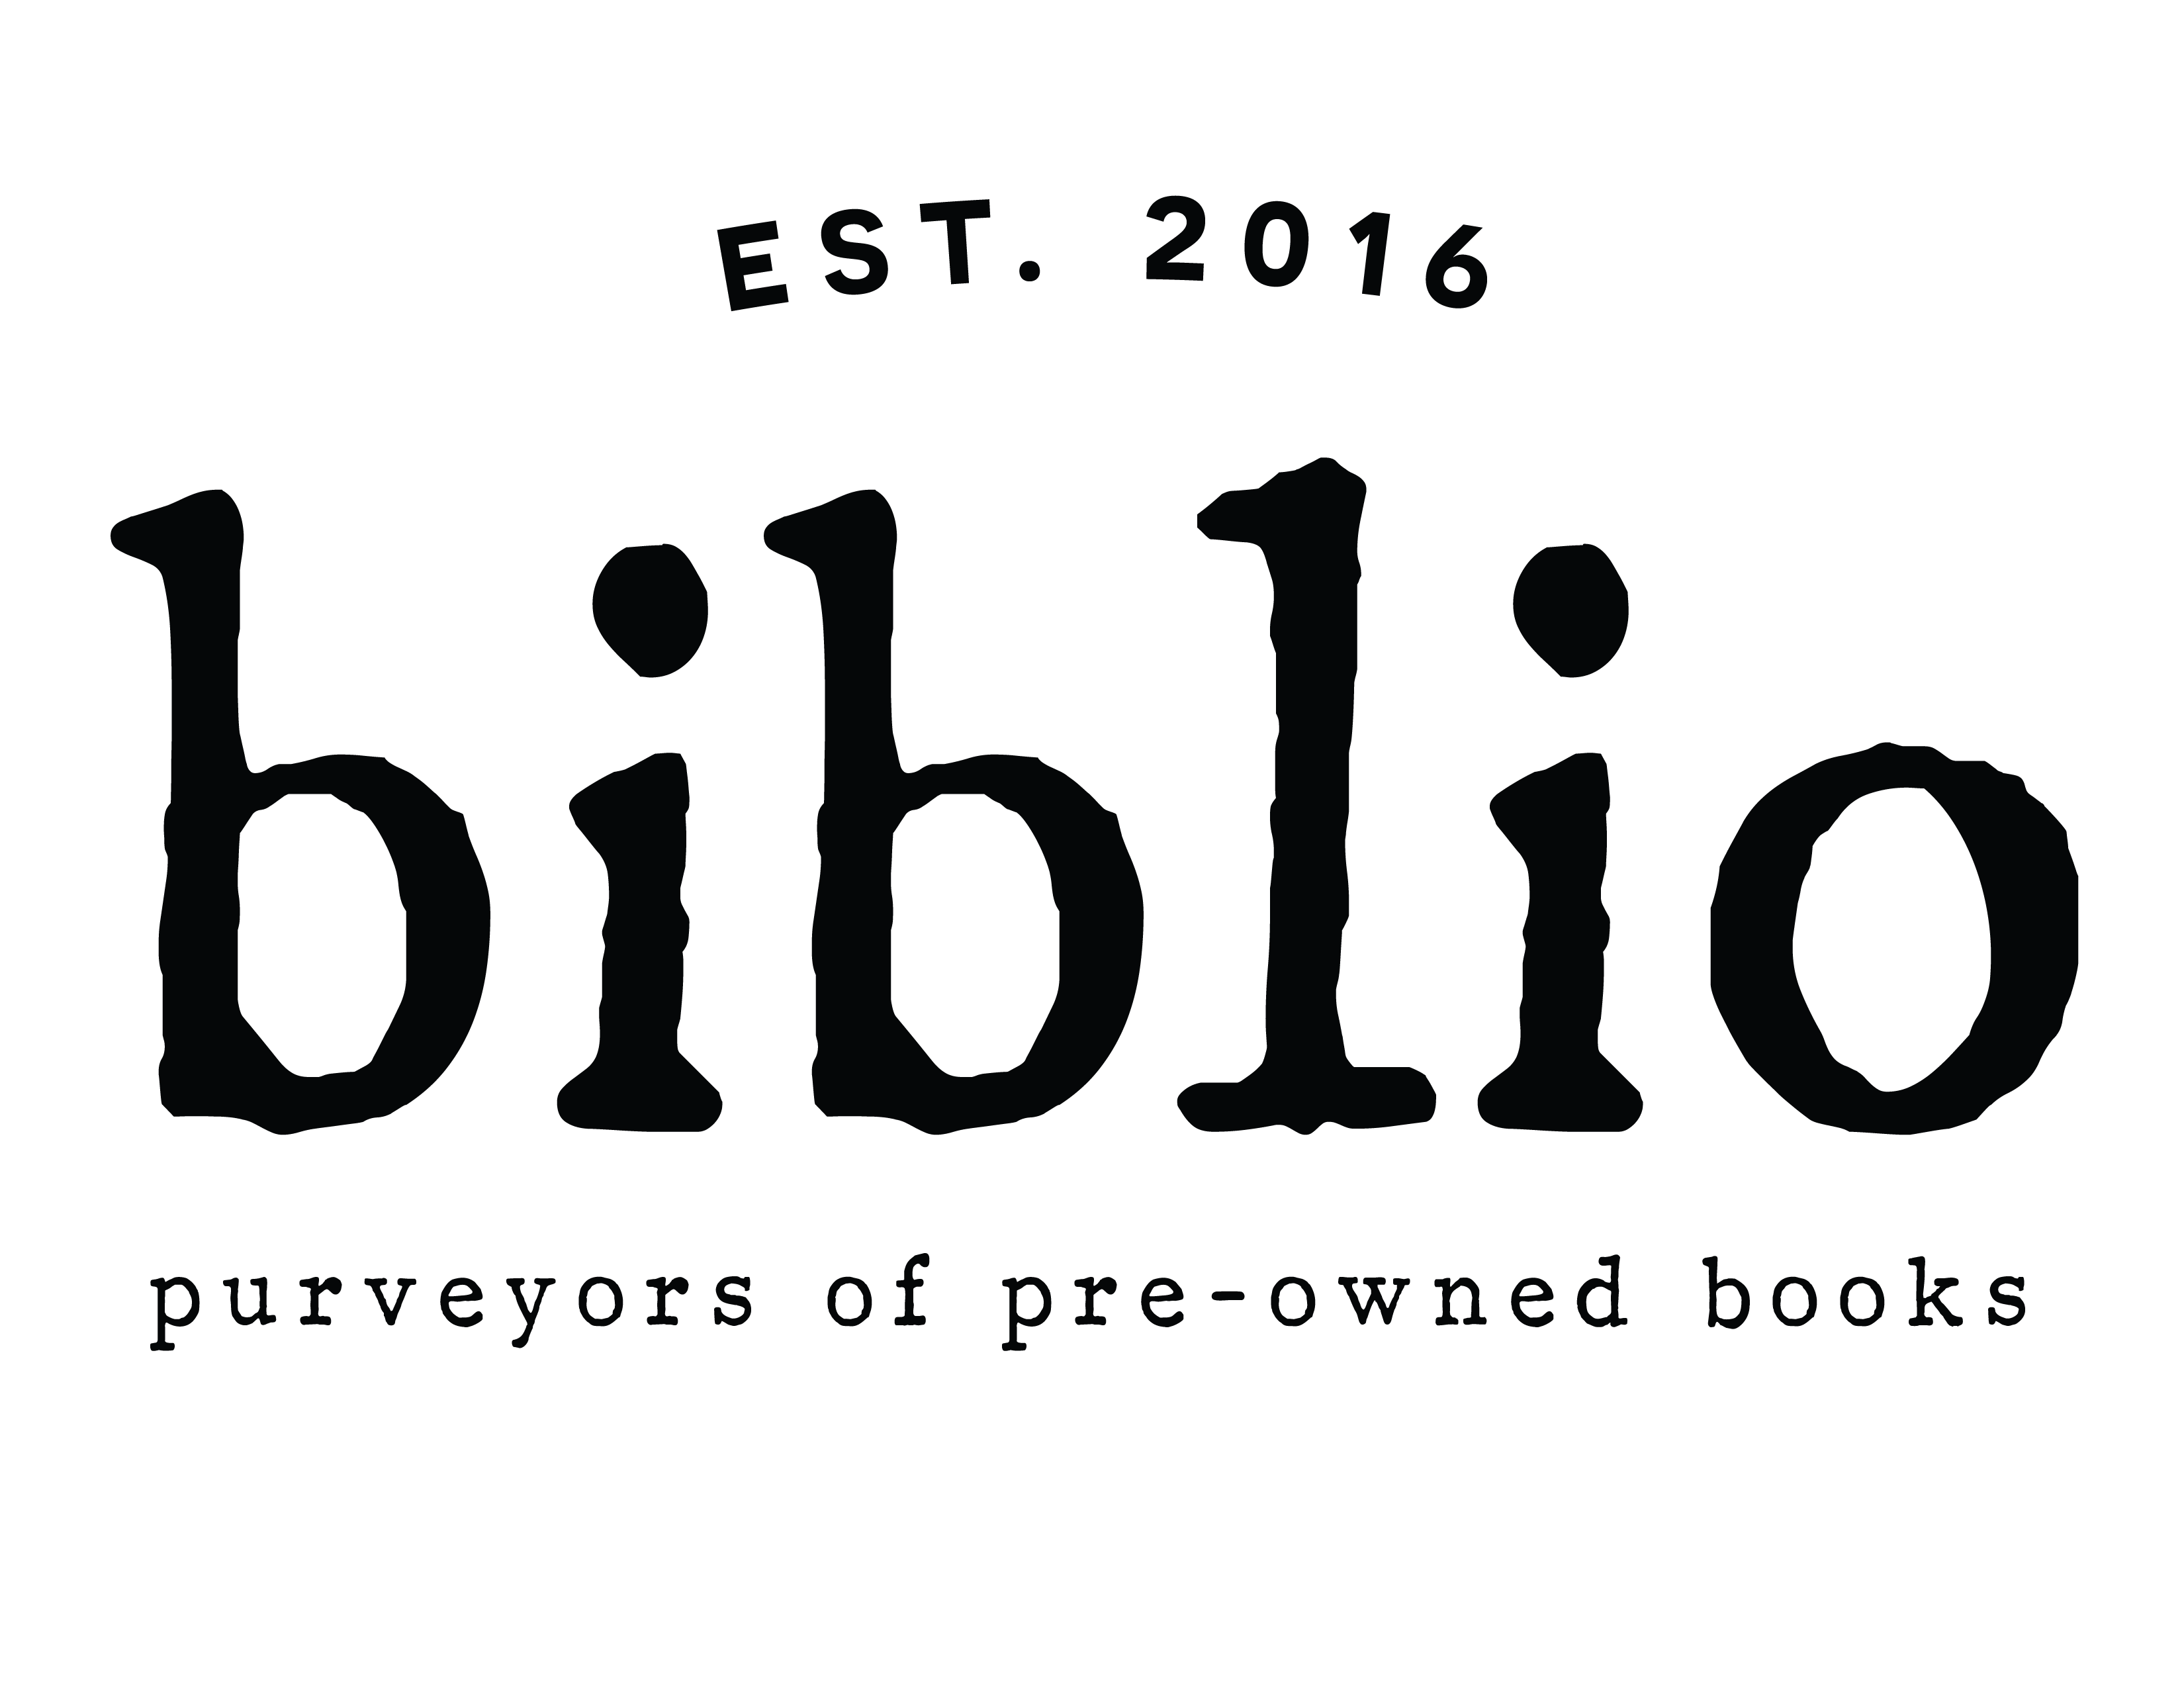 Biblio: Purveyors of Pre-owned Books